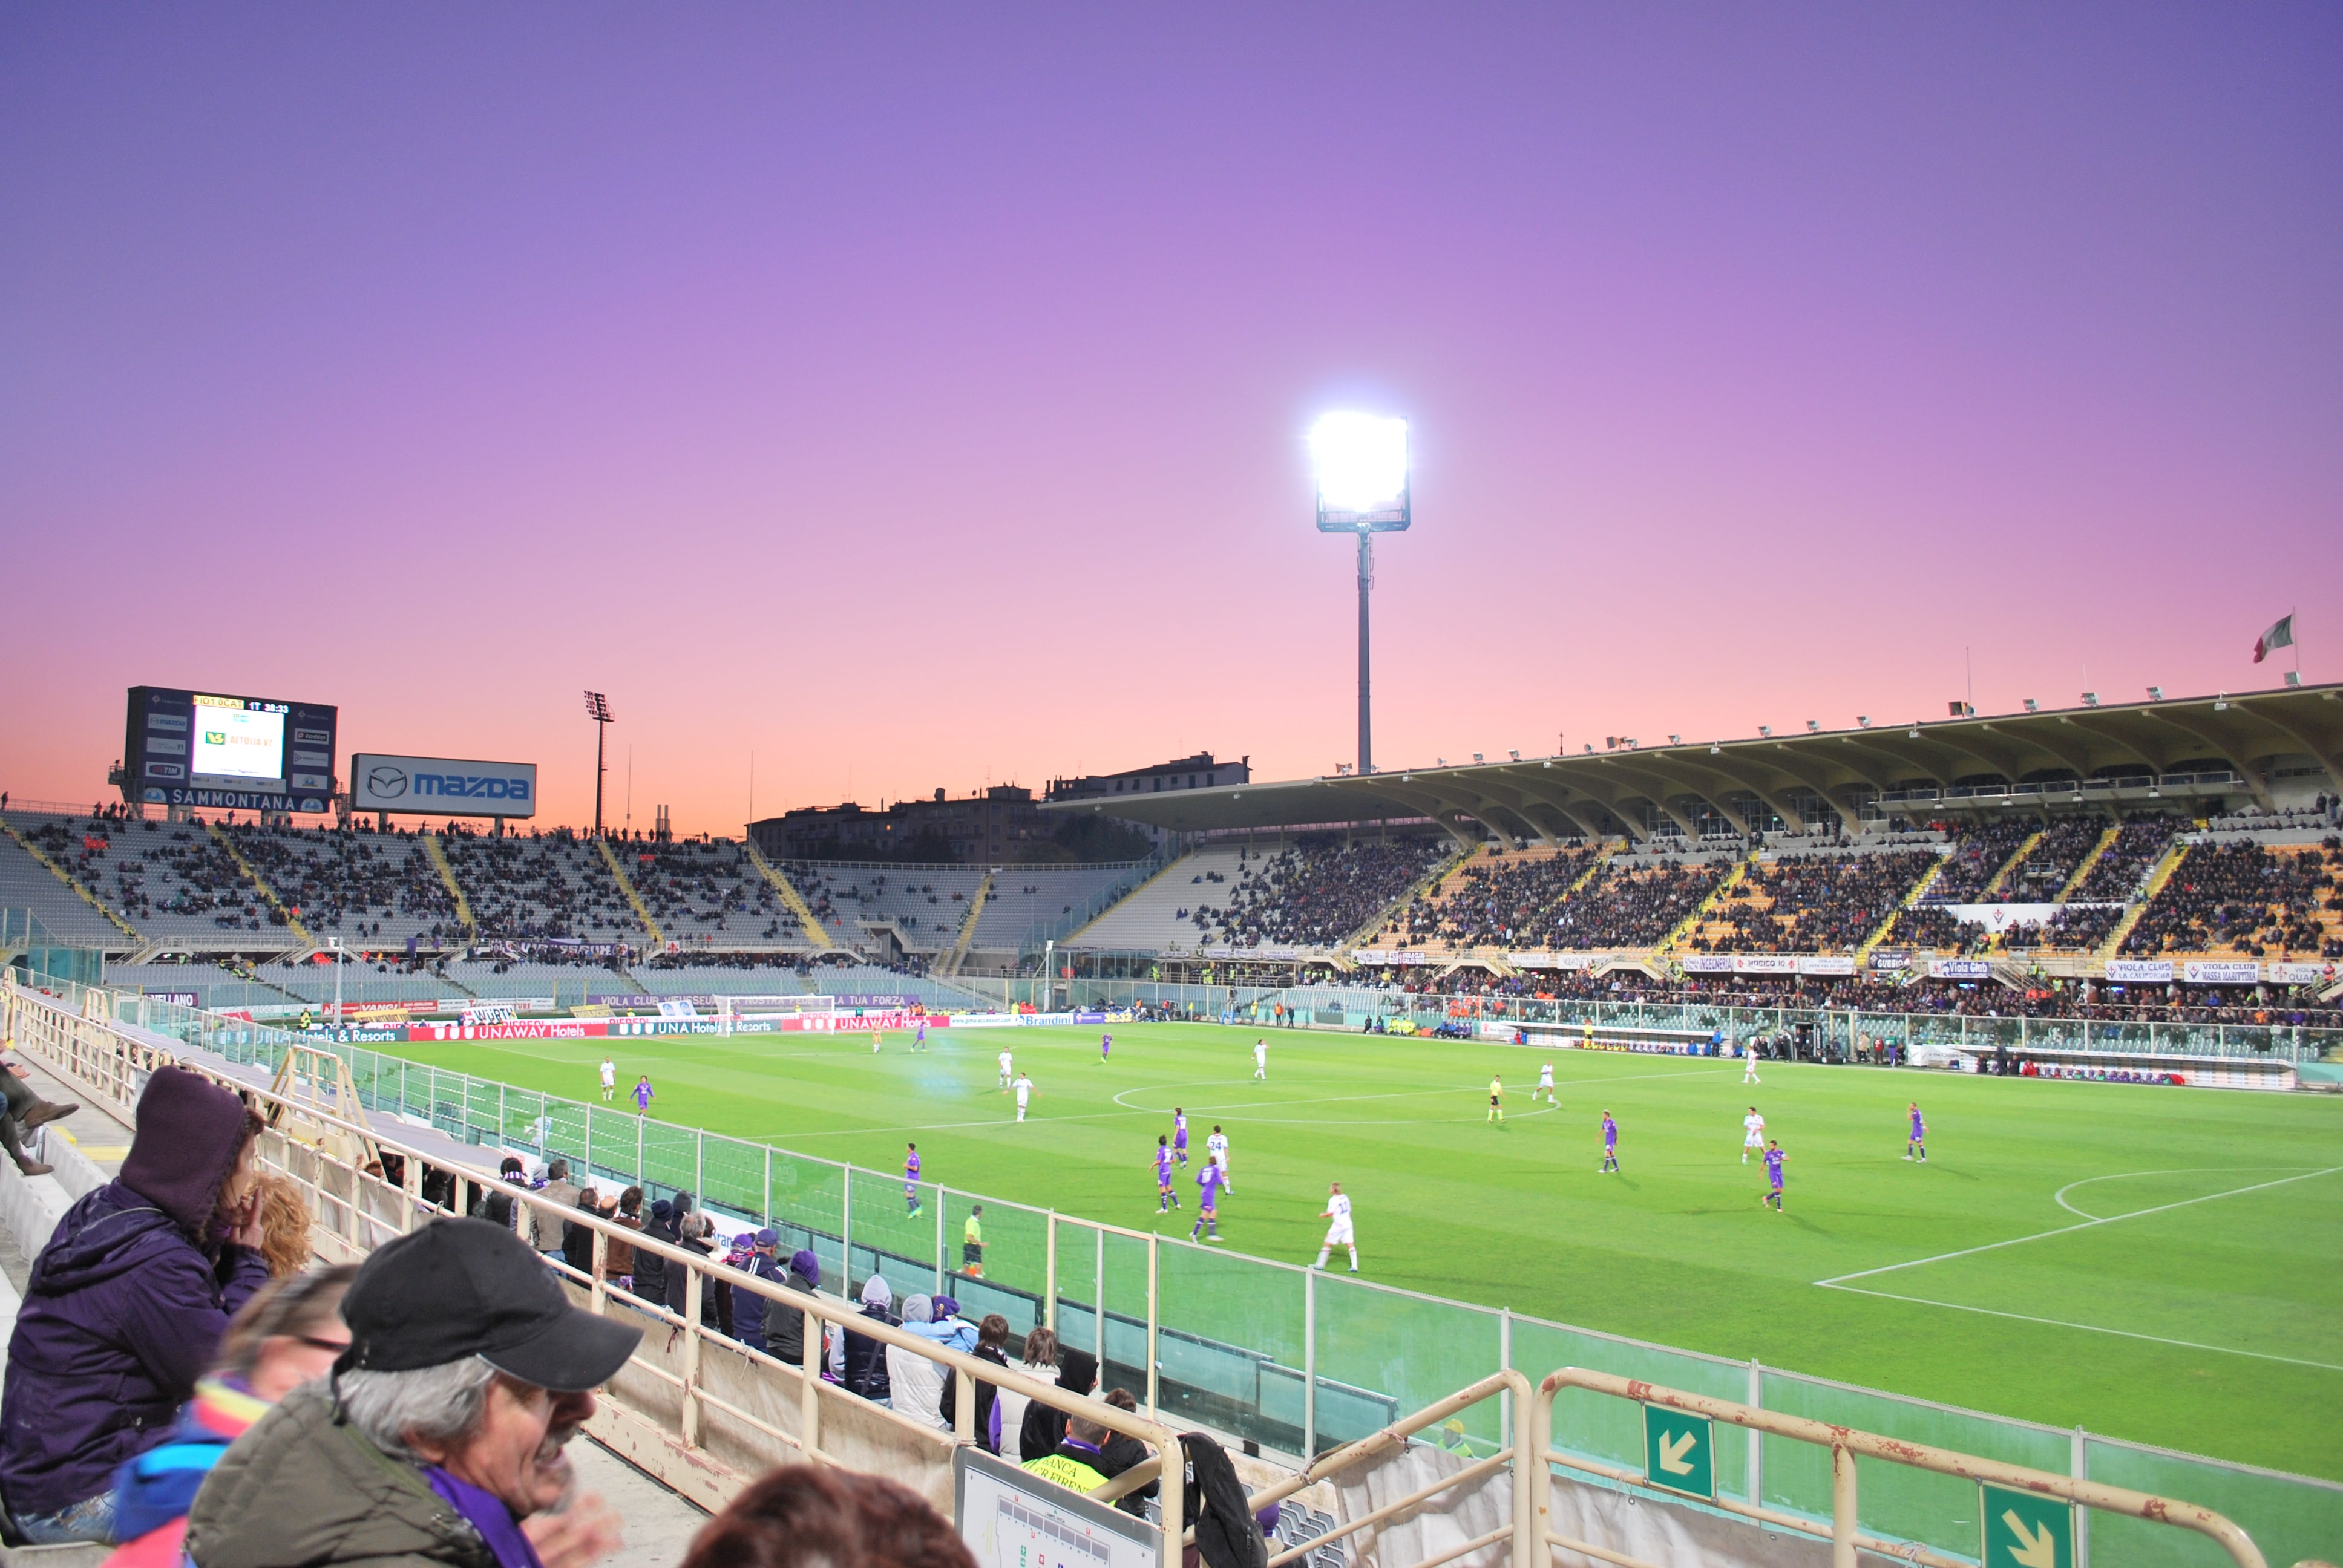 Fiorentina VS Udinese ( BETTING TIPS, Match Preview & Expert Analysis )